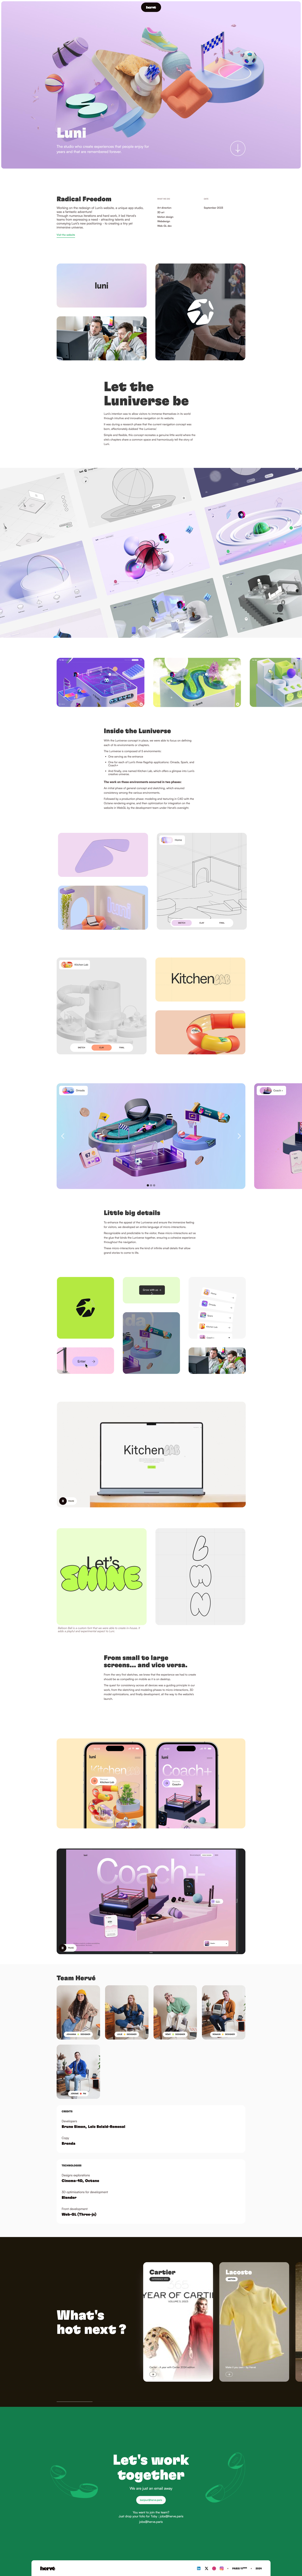 Herve Landing Page Example: Hervé is a Parisian design studio producing with care, Brand designs and web experiences, with a happy mood !